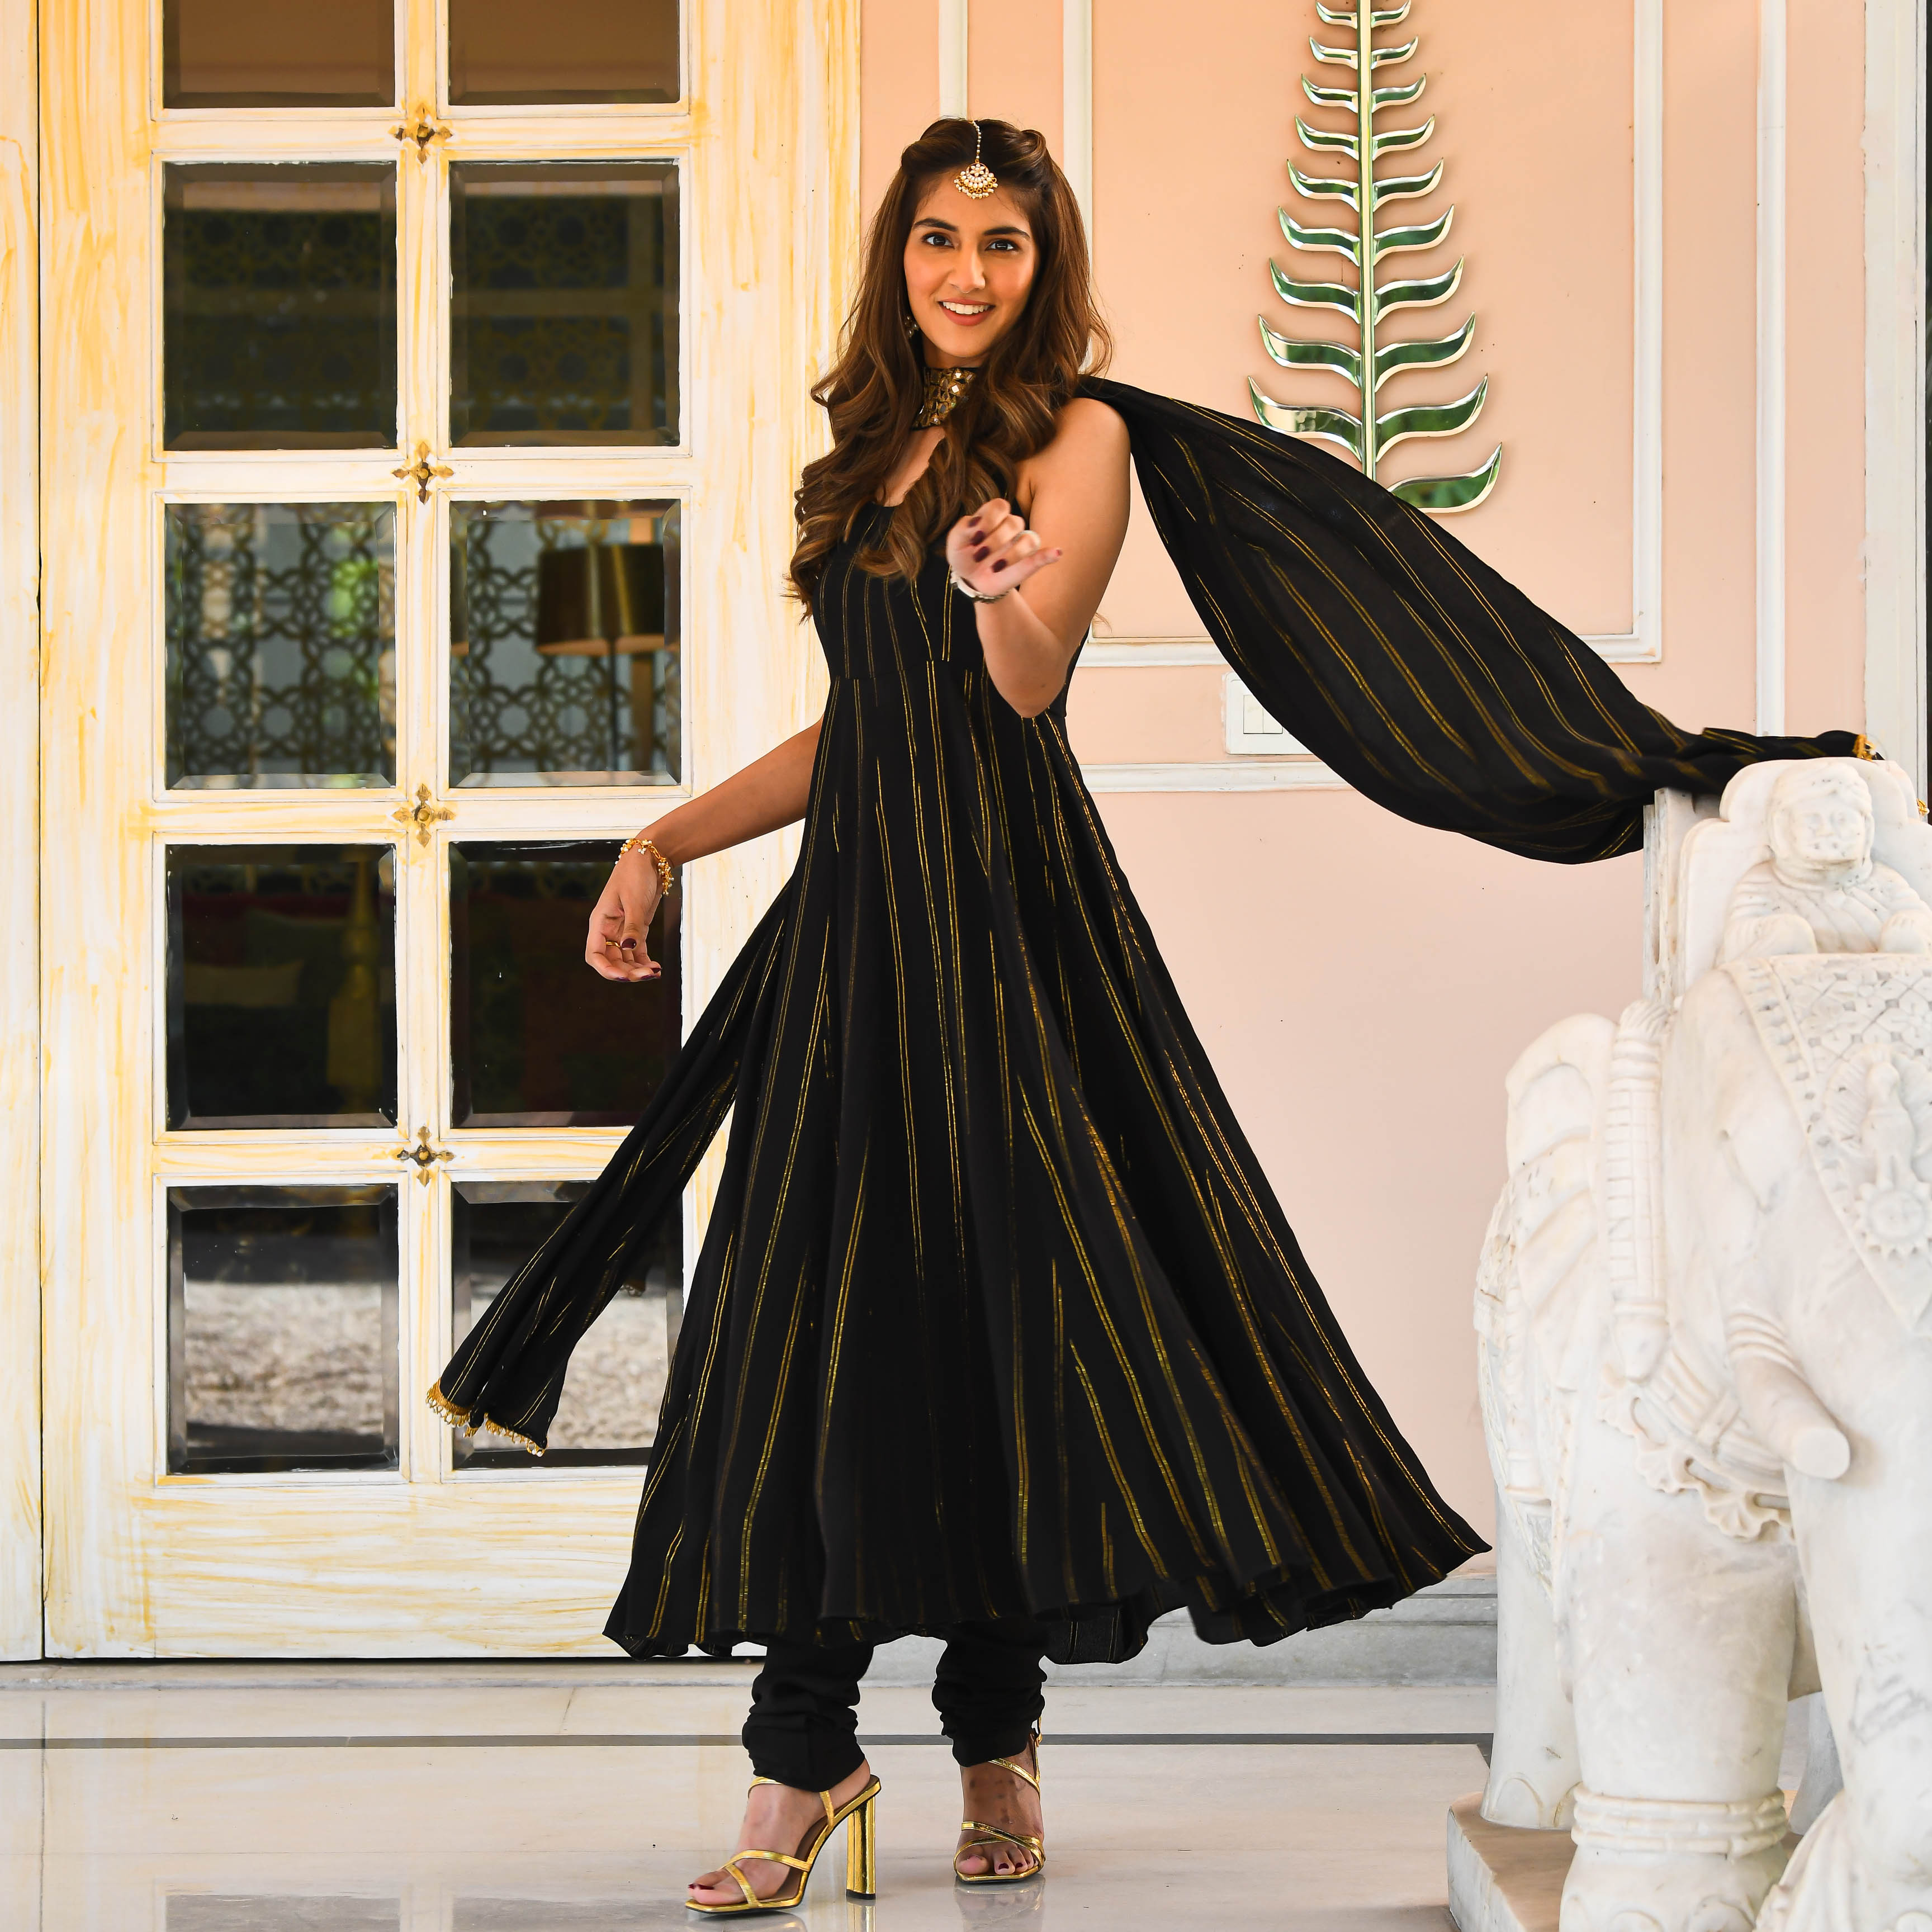 Buy Pretty Black Partywear Anarkali Suit online at Inddus.com. | Champagne  evening dress, Sleeveless wedding gown, Wedding gowns online